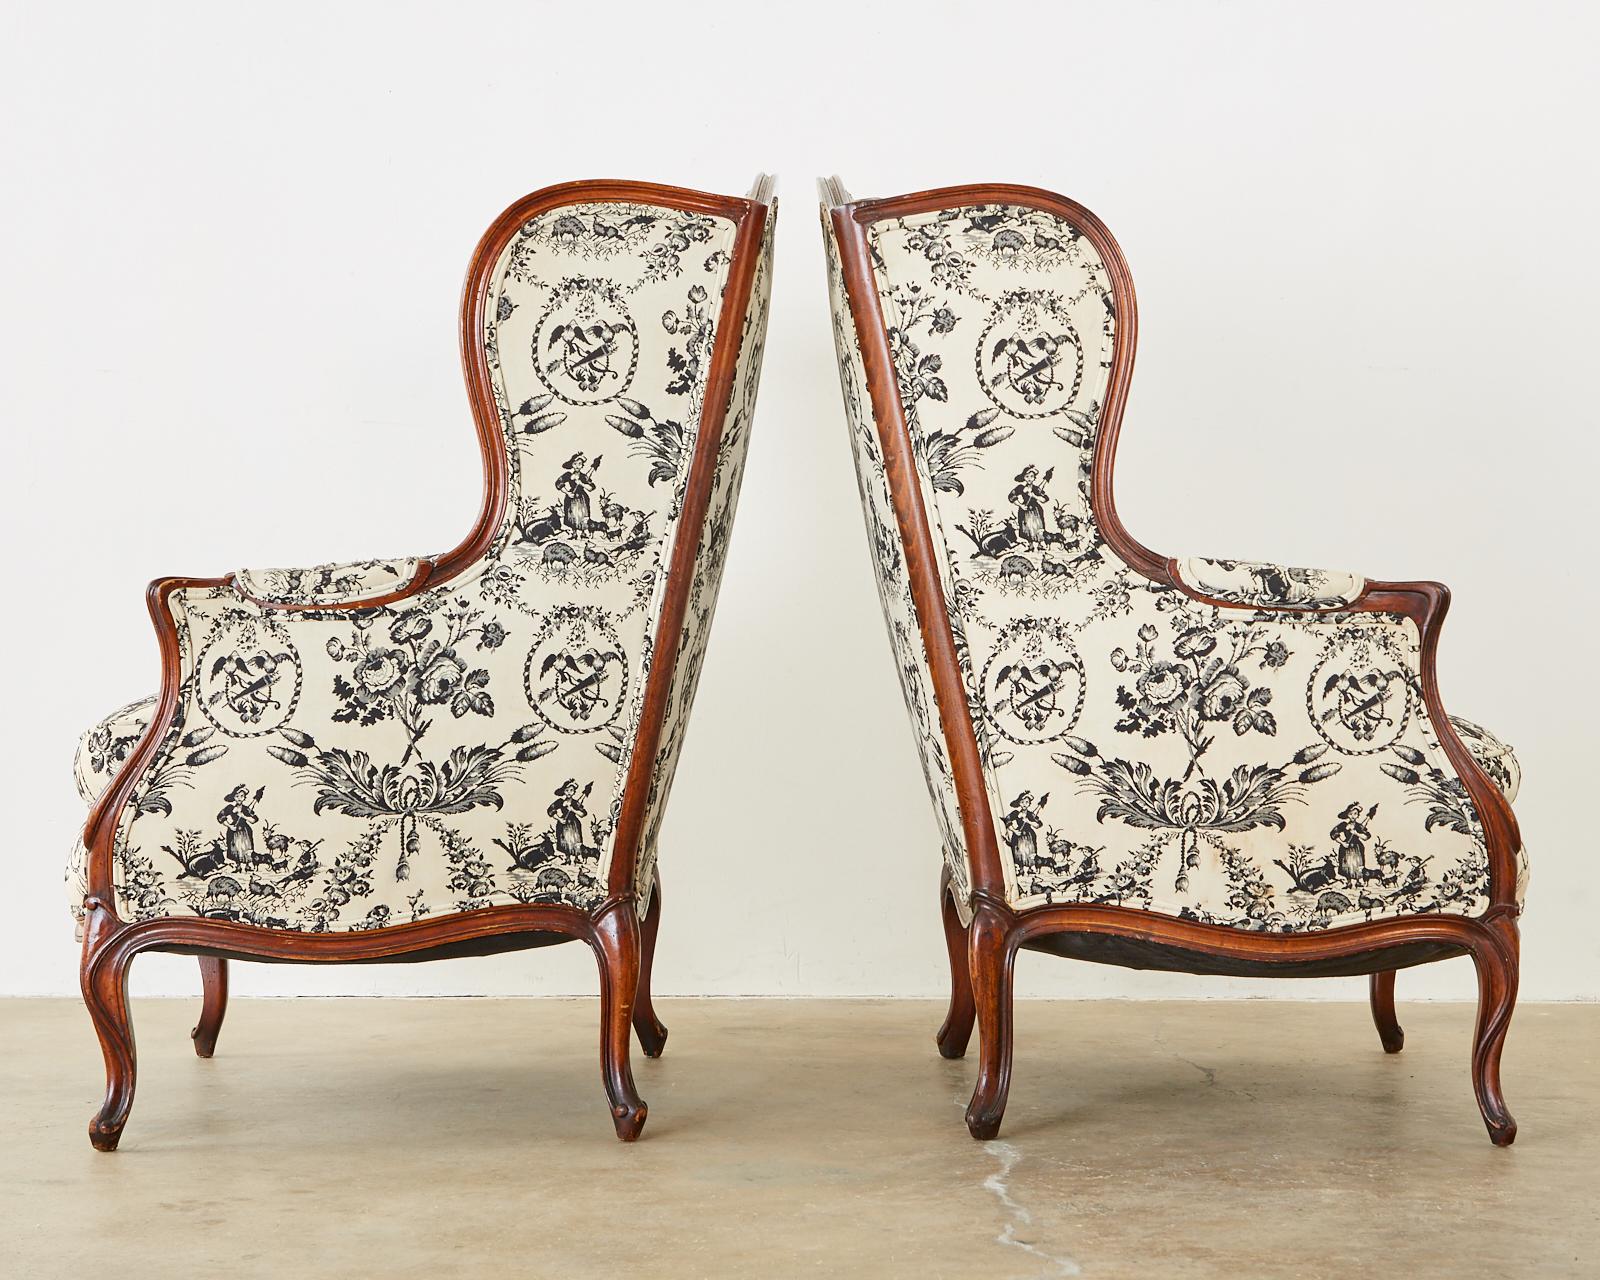 20th Century Pair of French Louis XV Style Toile Wingback Chairs